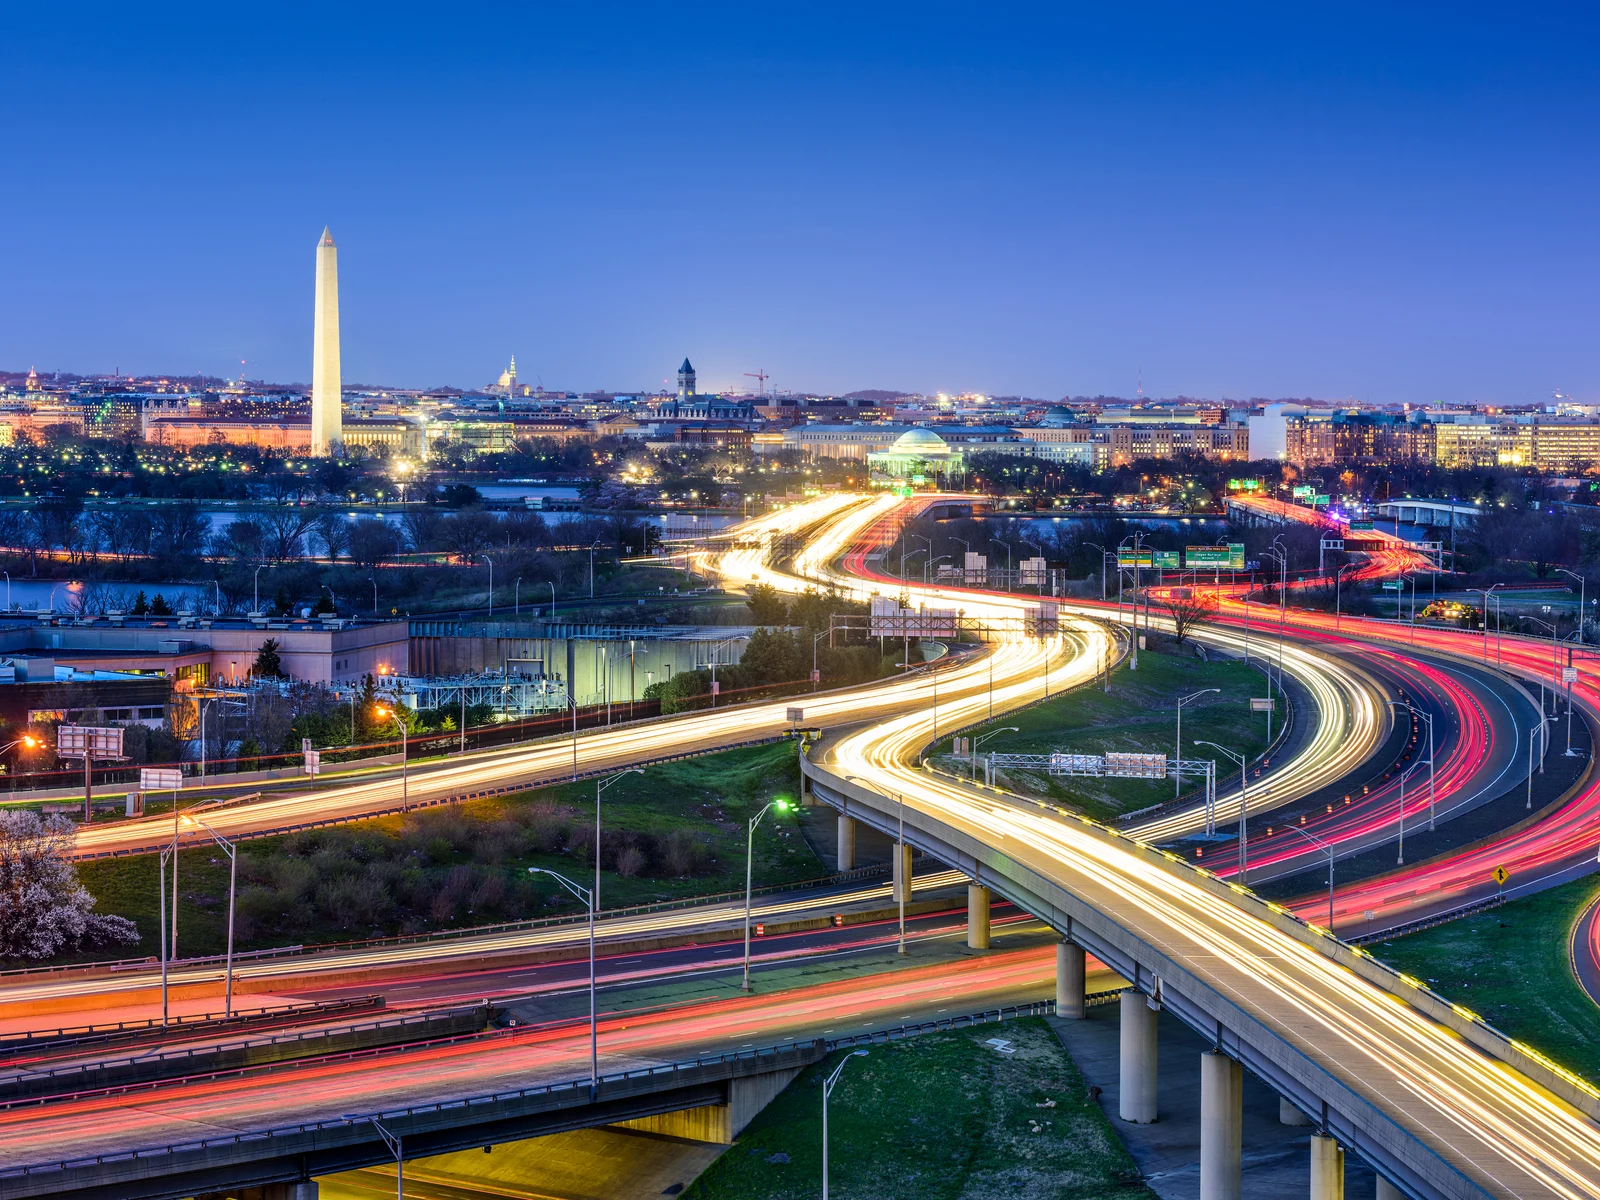 A wide view of the majority of Washington at dusk showcasing the best things to do in Washington, D.C.